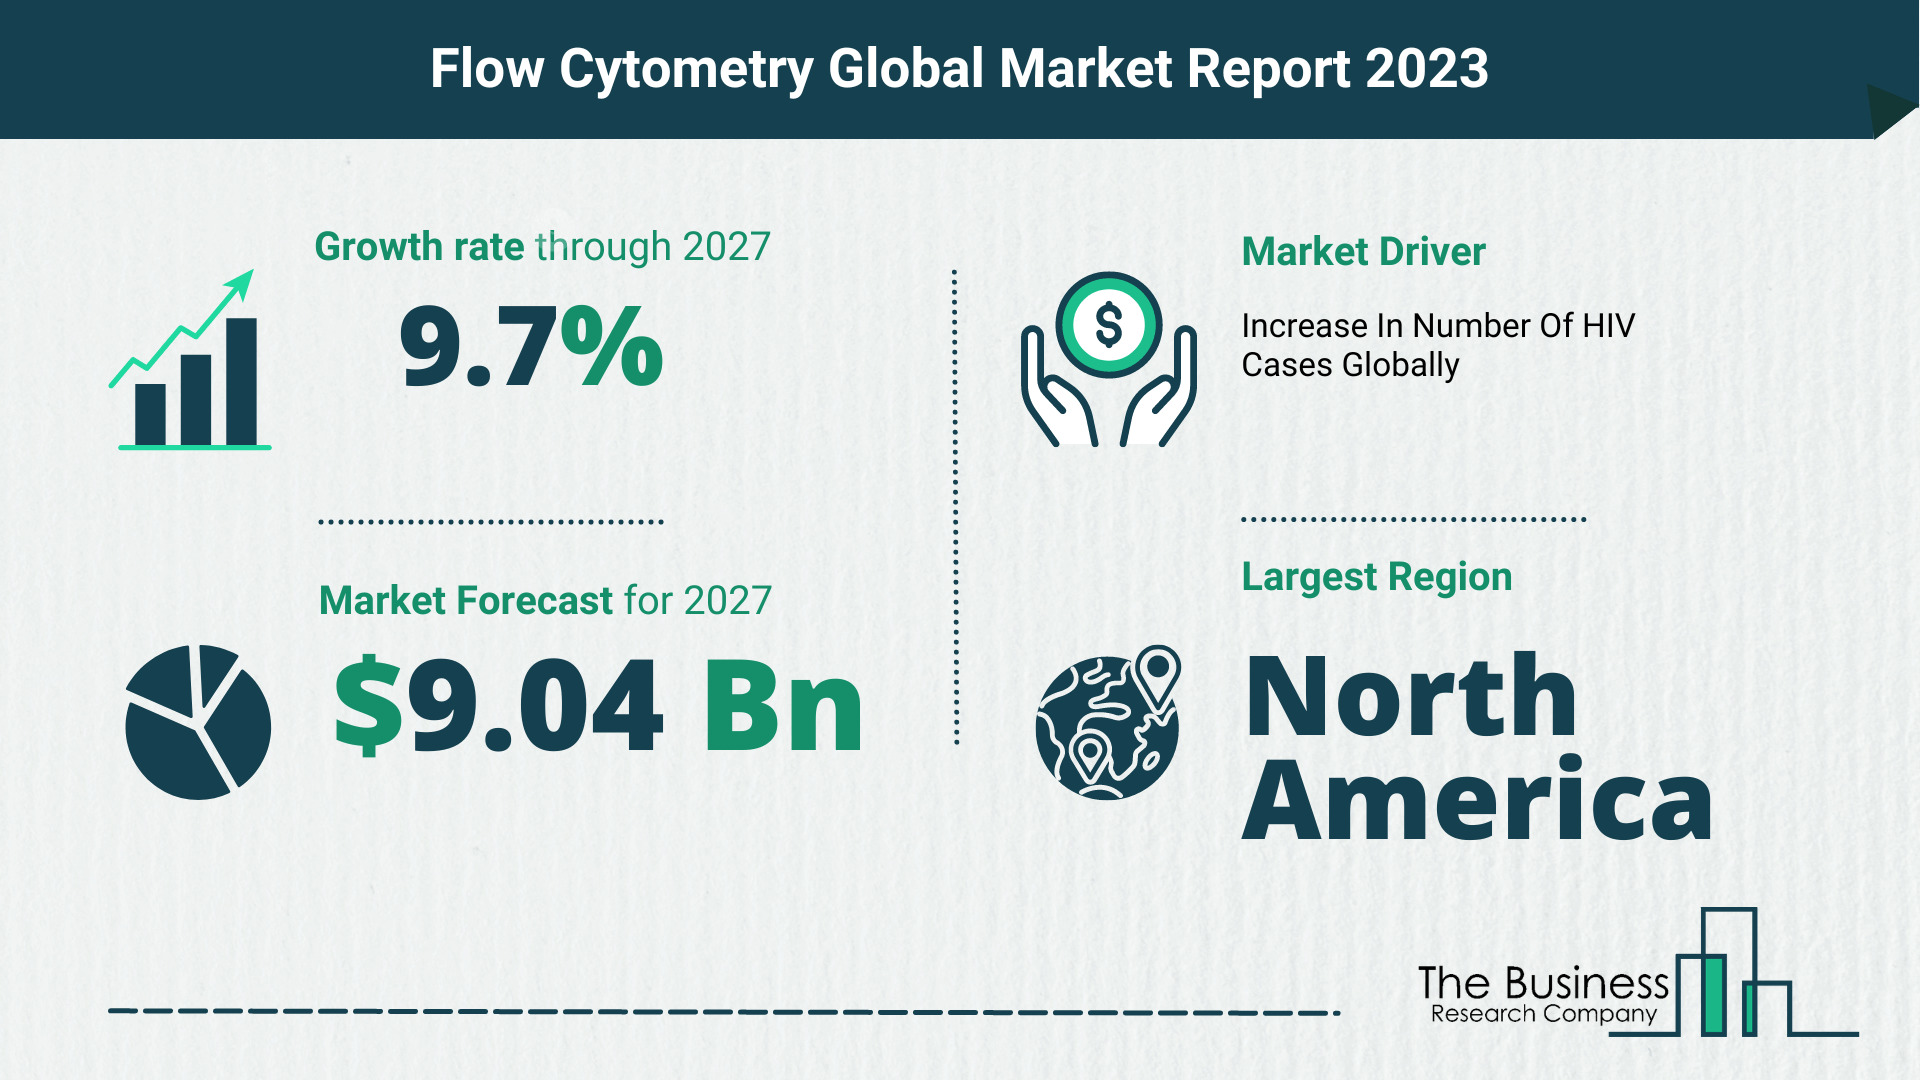 Global Flow Cytometry Market Opportunities And Strategies 2023